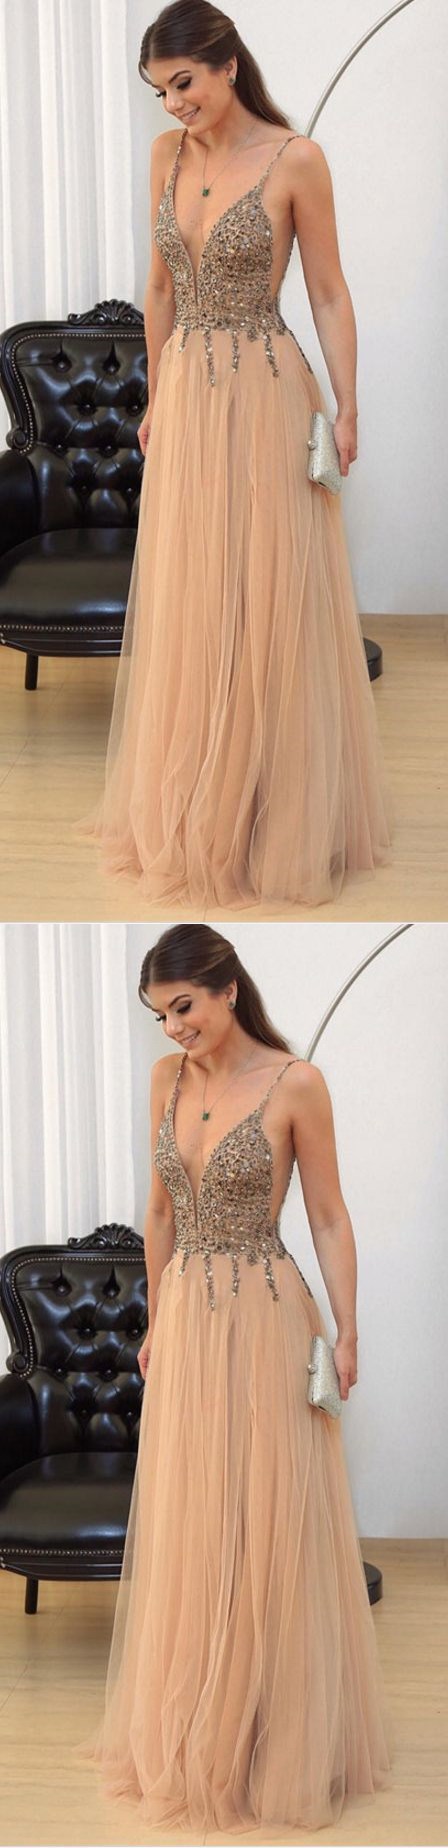 Sexy Prom Dresses,sleeveless Beads Crystal Evening Dress,long Prom Dresses,formal Party Gown From Fashiondressee